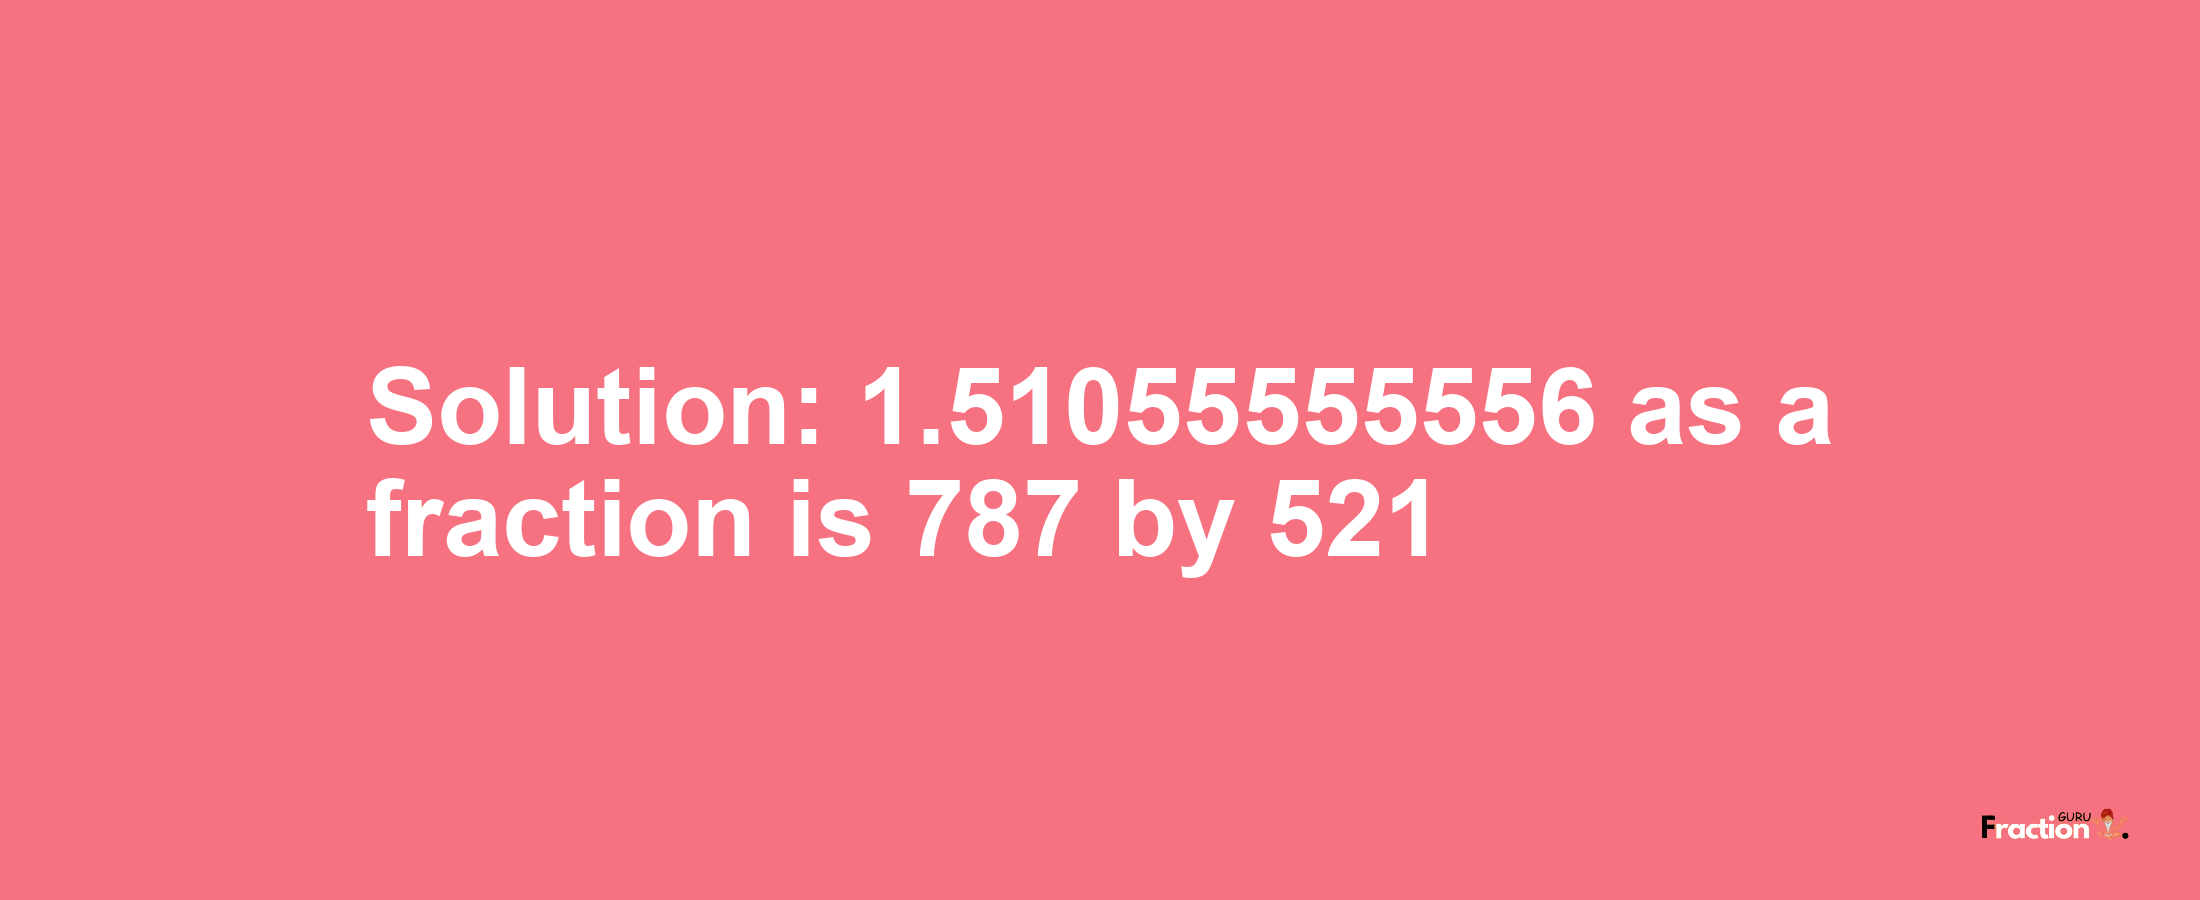 Solution:1.51055555556 as a fraction is 787/521